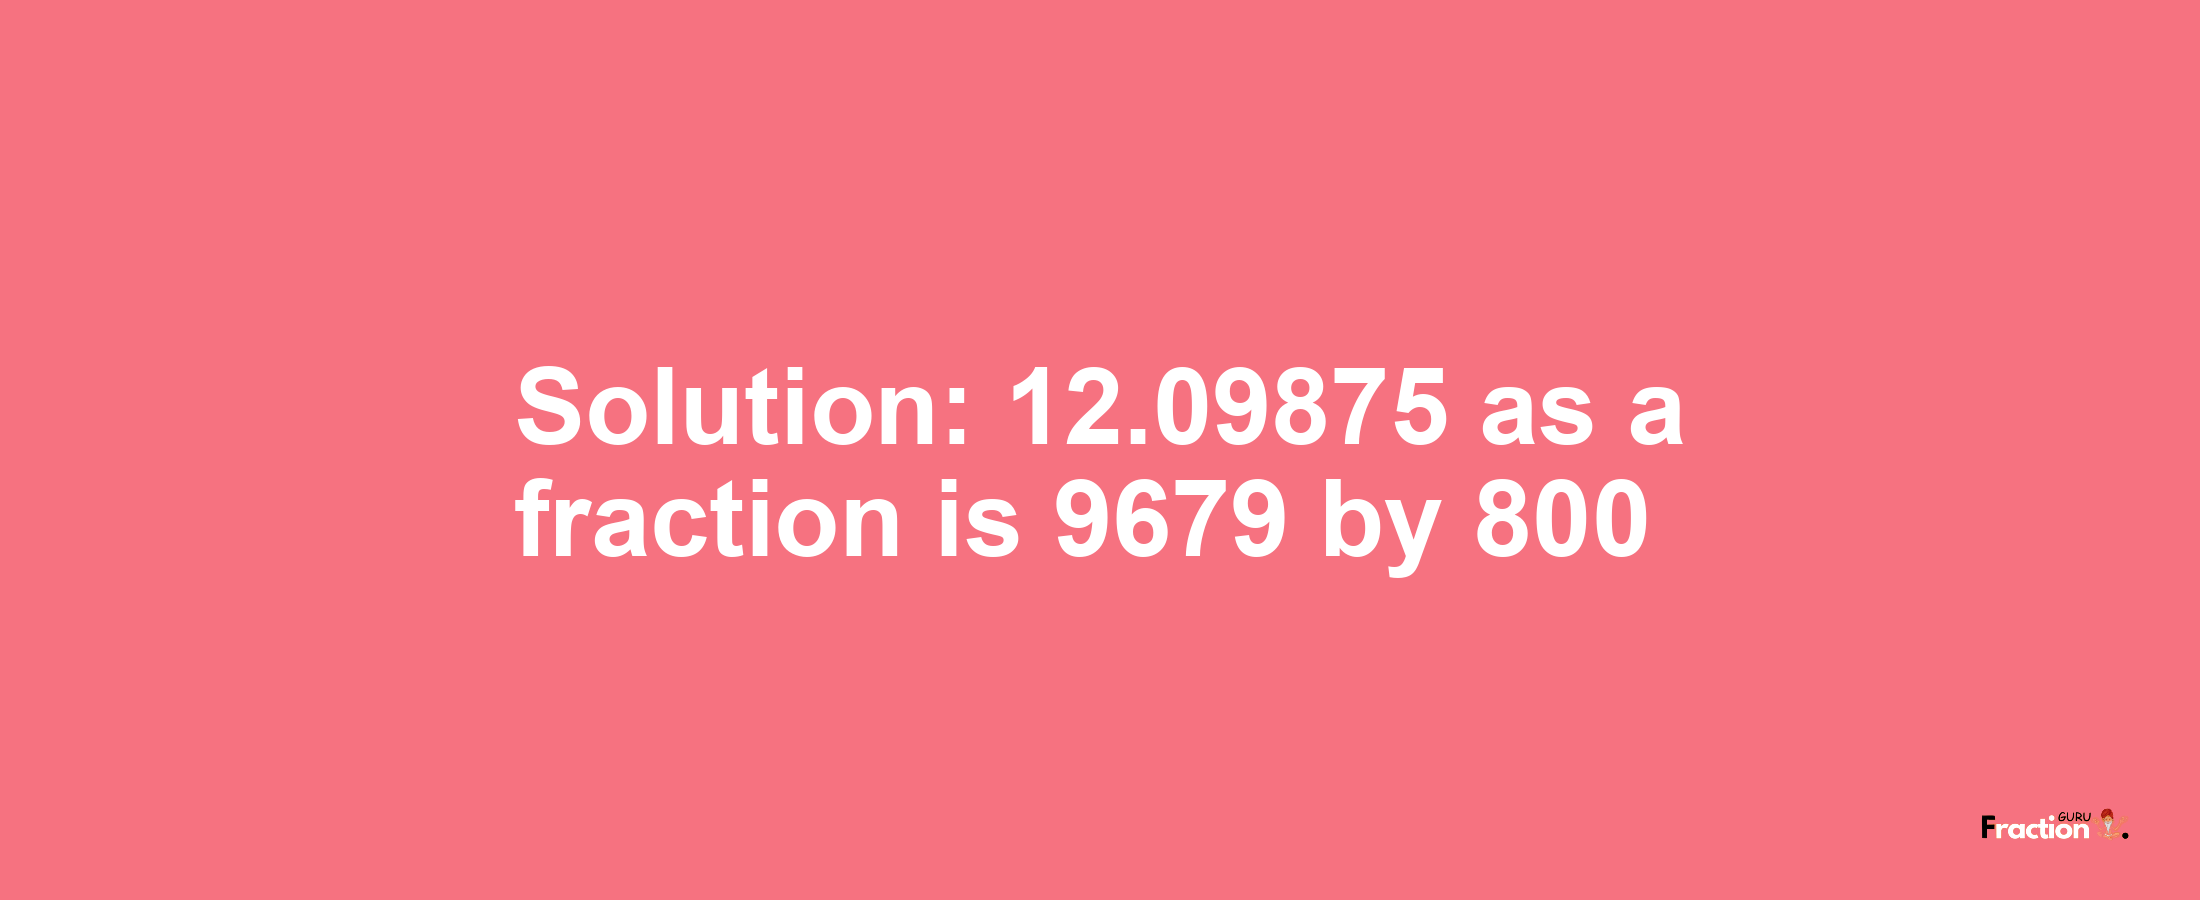 Solution:12.09875 as a fraction is 9679/800